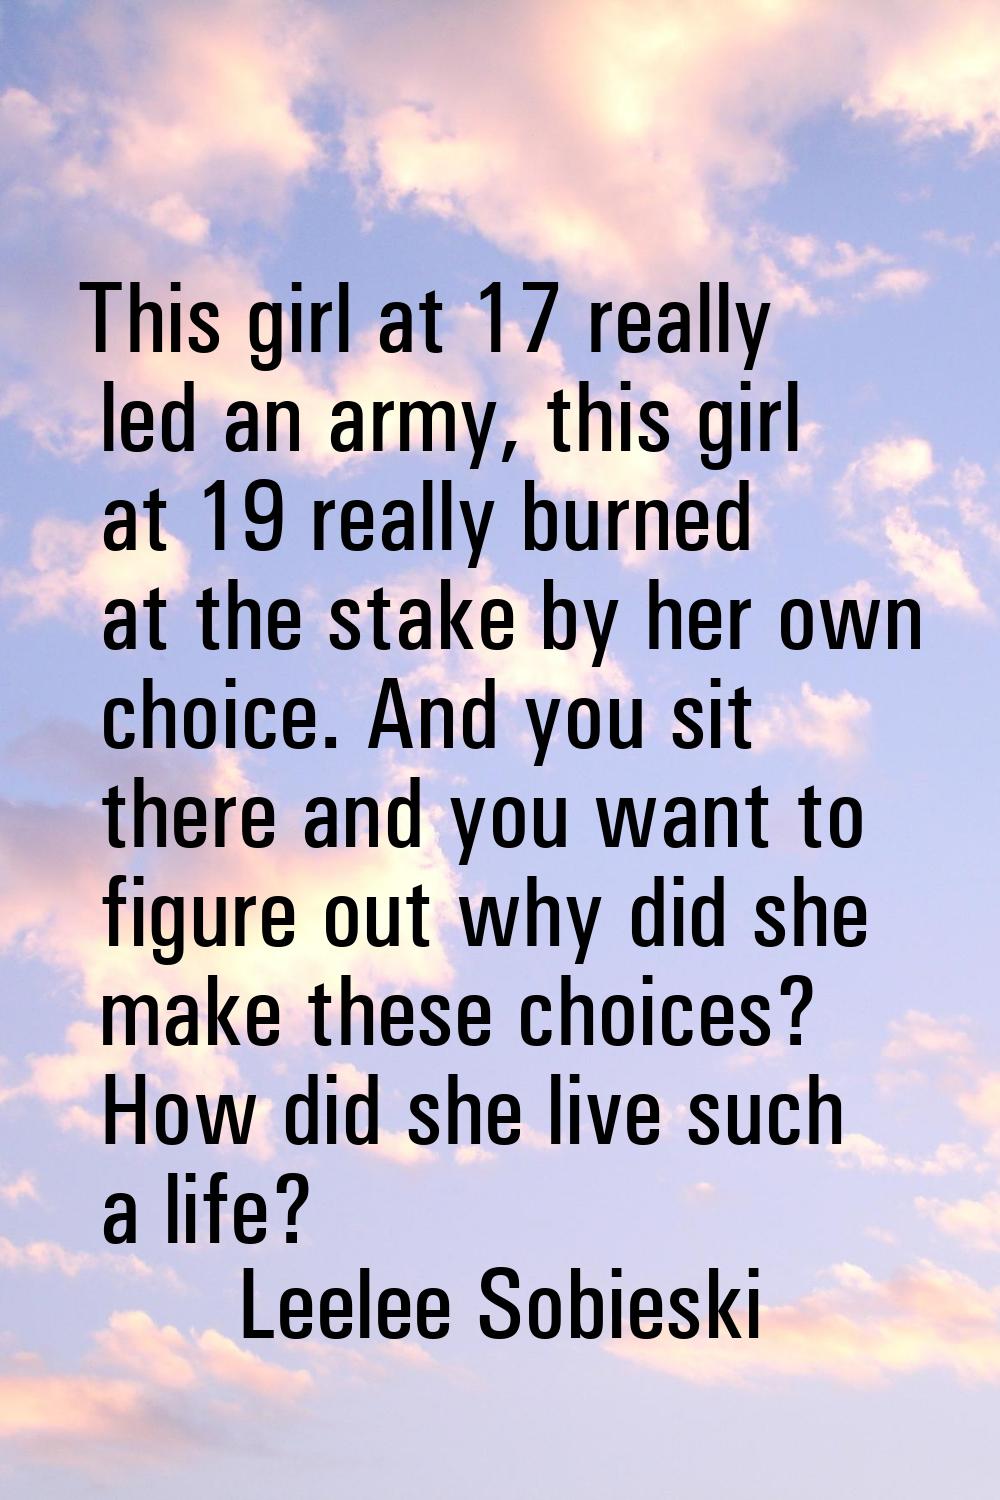 This girl at 17 really led an army, this girl at 19 really burned at the stake by her own choice. A